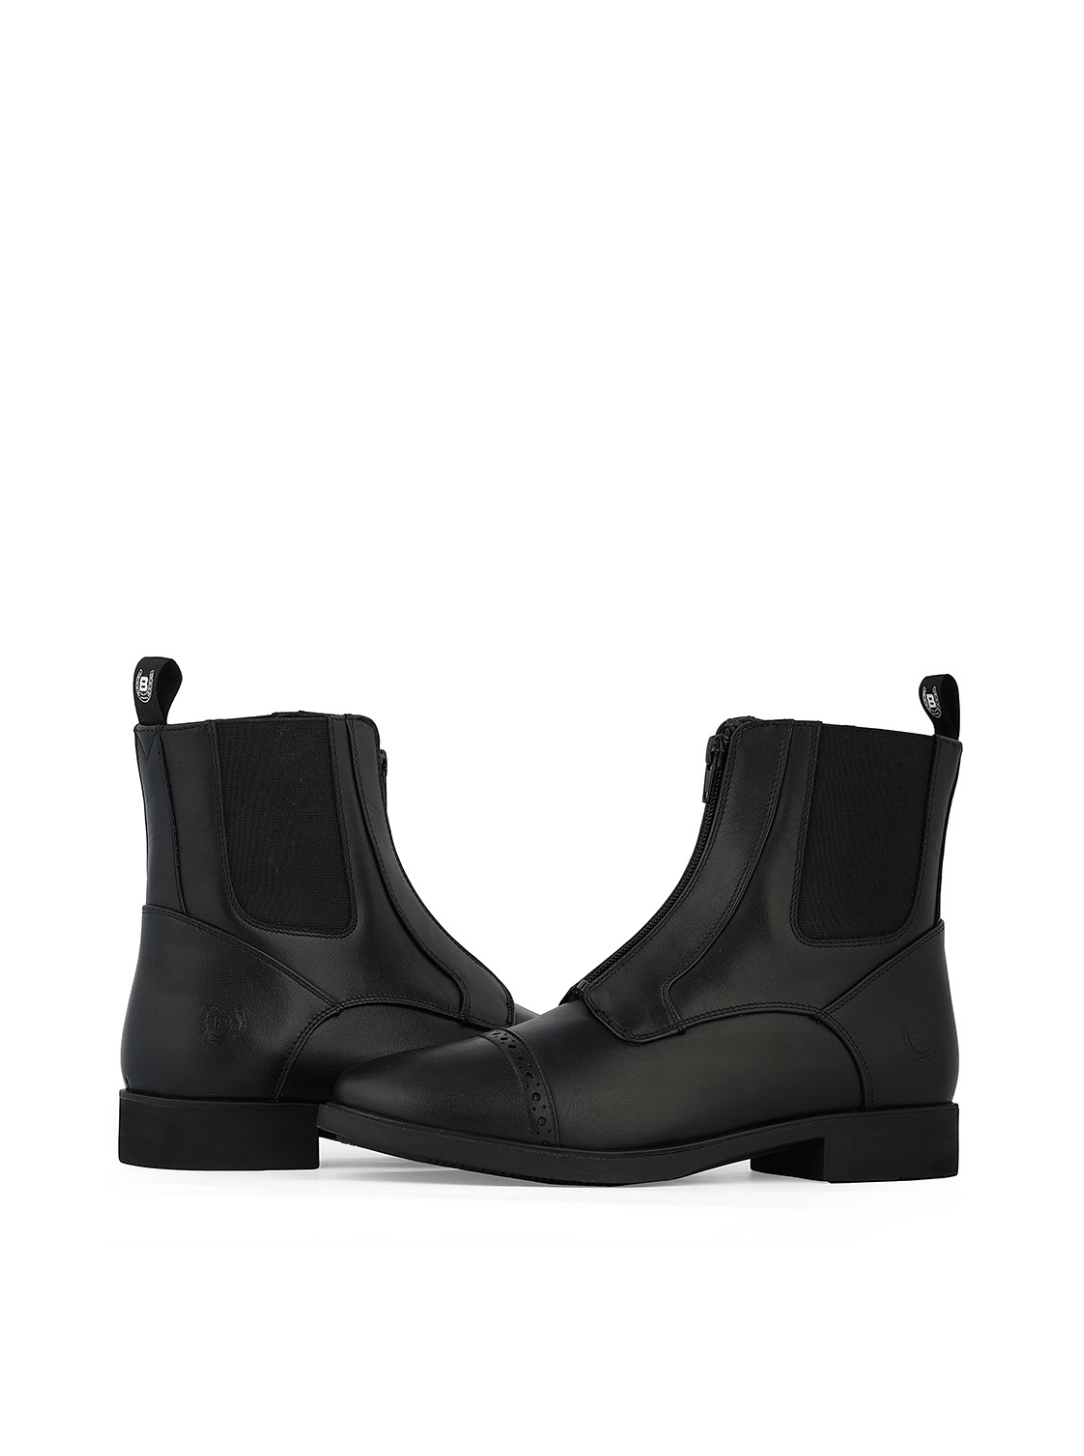 GYPSY Kids - Ankle riding boots.